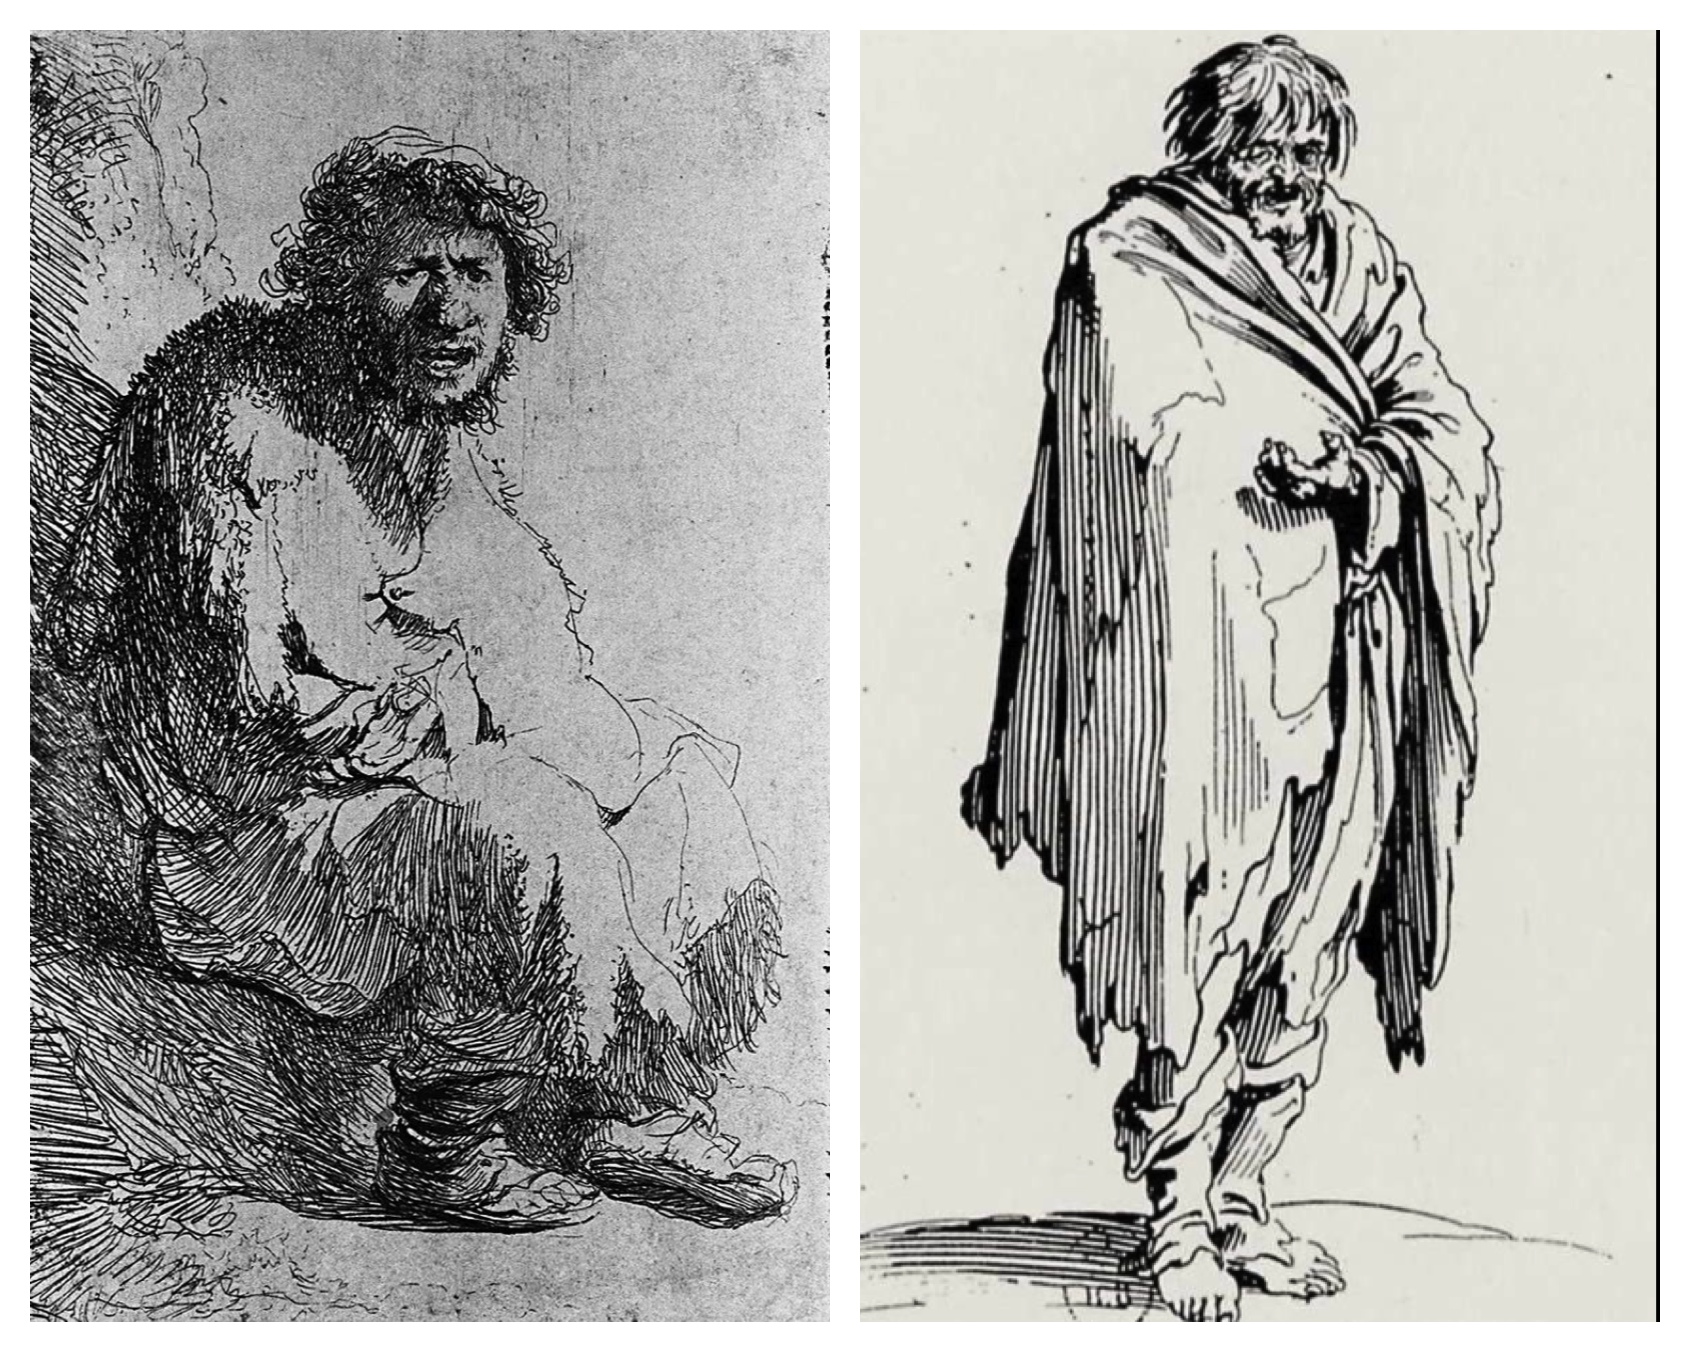 EPPH | Rembrandt's Self-portrait as A Beggar Seated on a Bank (1630)